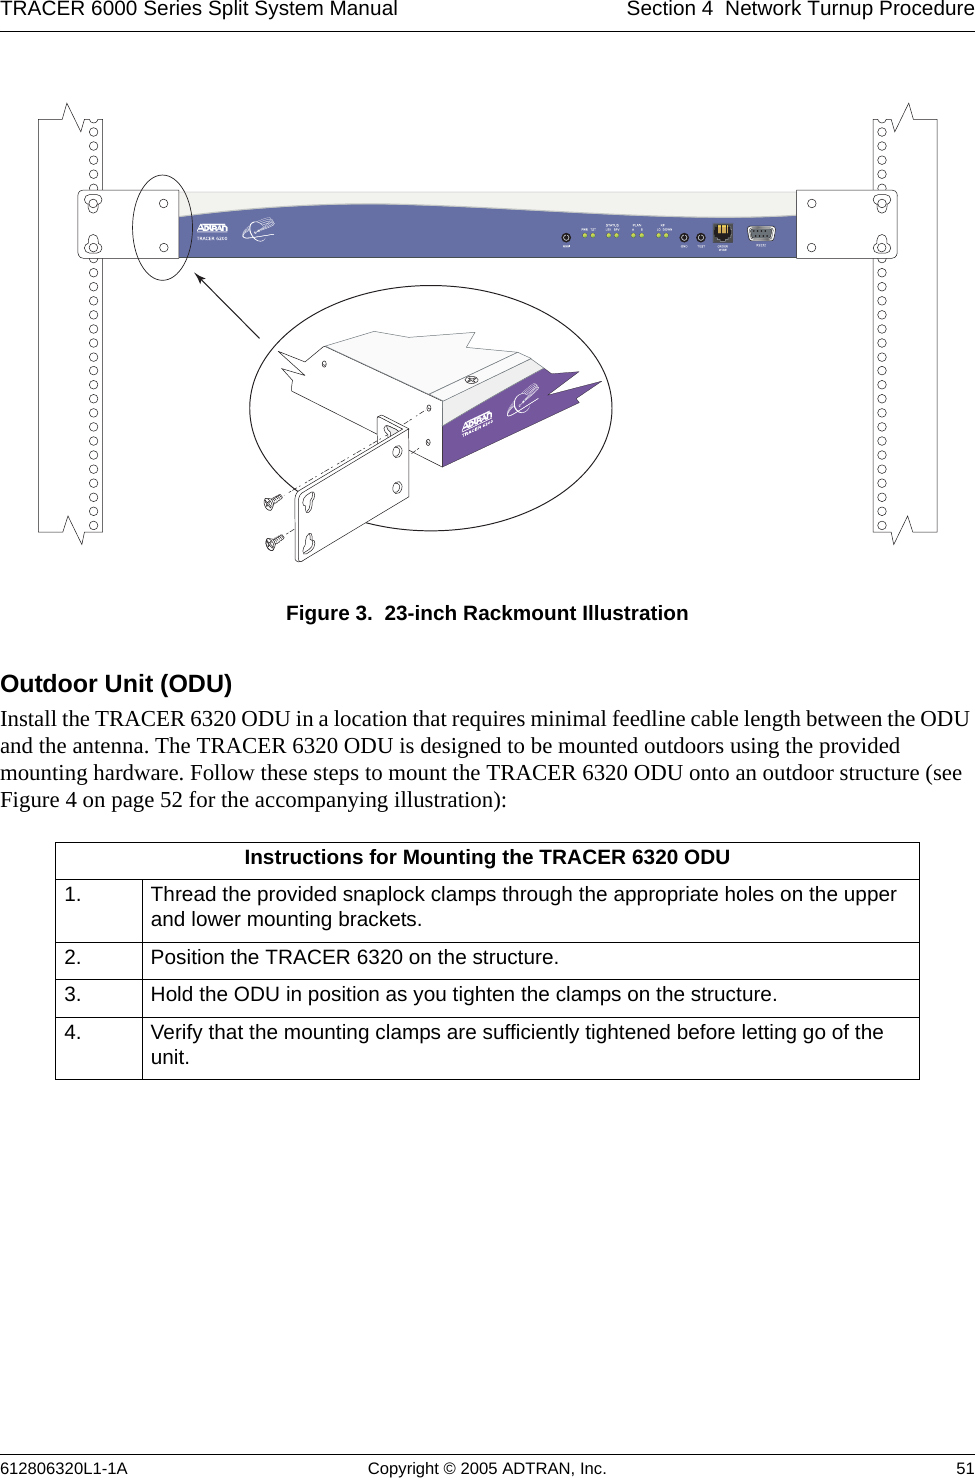 TRACER 6000 Series Split System Manual Section 4  Network Turnup Procedure612806320L1-1A Copyright © 2005 ADTRAN, Inc. 51Figure 3.  23-inch Rackmount IllustrationOutdoor Unit (ODU)Install the TRACER 6320 ODU in a location that requires minimal feedline cable length between the ODU and the antenna. The TRACER 6320 ODU is designed to be mounted outdoors using the provided mounting hardware. Follow these steps to mount the TRACER 6320 ODU onto an outdoor structure (see Figure 4 on page 52 for the accompanying illustration):Instructions for Mounting the TRACER 6320 ODU1. Thread the provided snaplock clamps through the appropriate holes on the upper and lower mounting brackets.2. Position the TRACER 6320 on the structure.3. Hold the ODU in position as you tighten the clamps on the structure.4. Verify that the mounting clamps are sufficiently tightened before letting go of the unit.